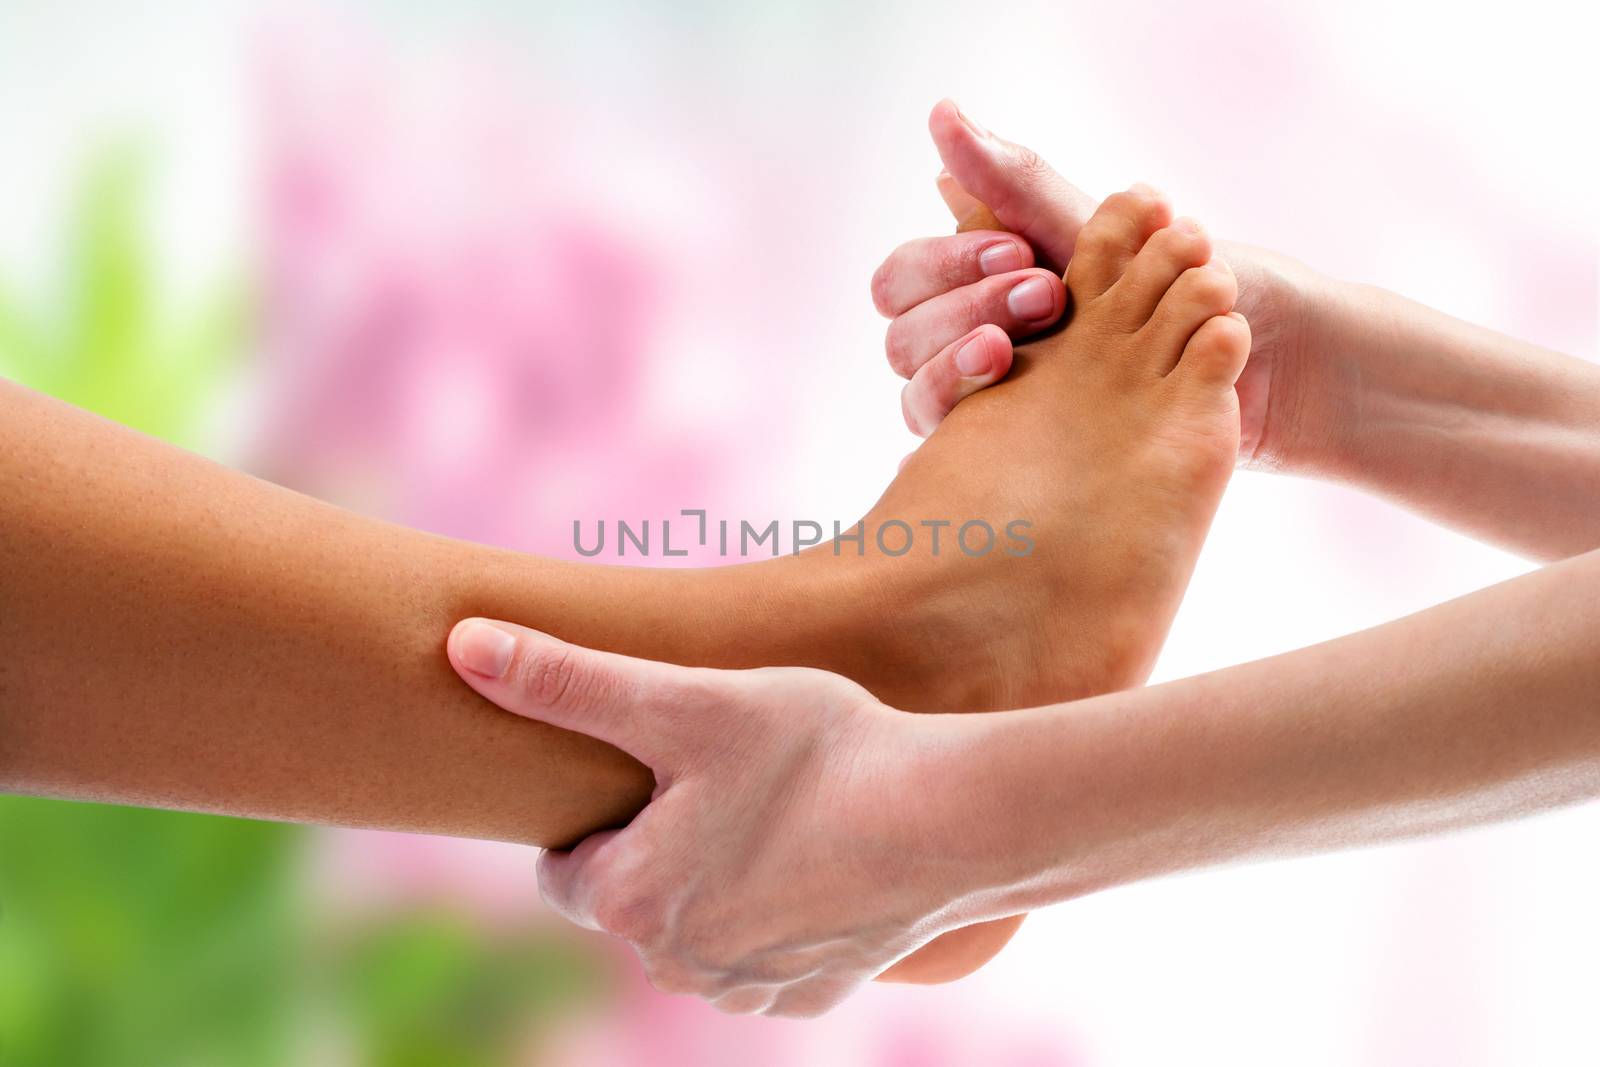 Extreme close up of therapist doing osteopathic massage on female foot. Colorful background.